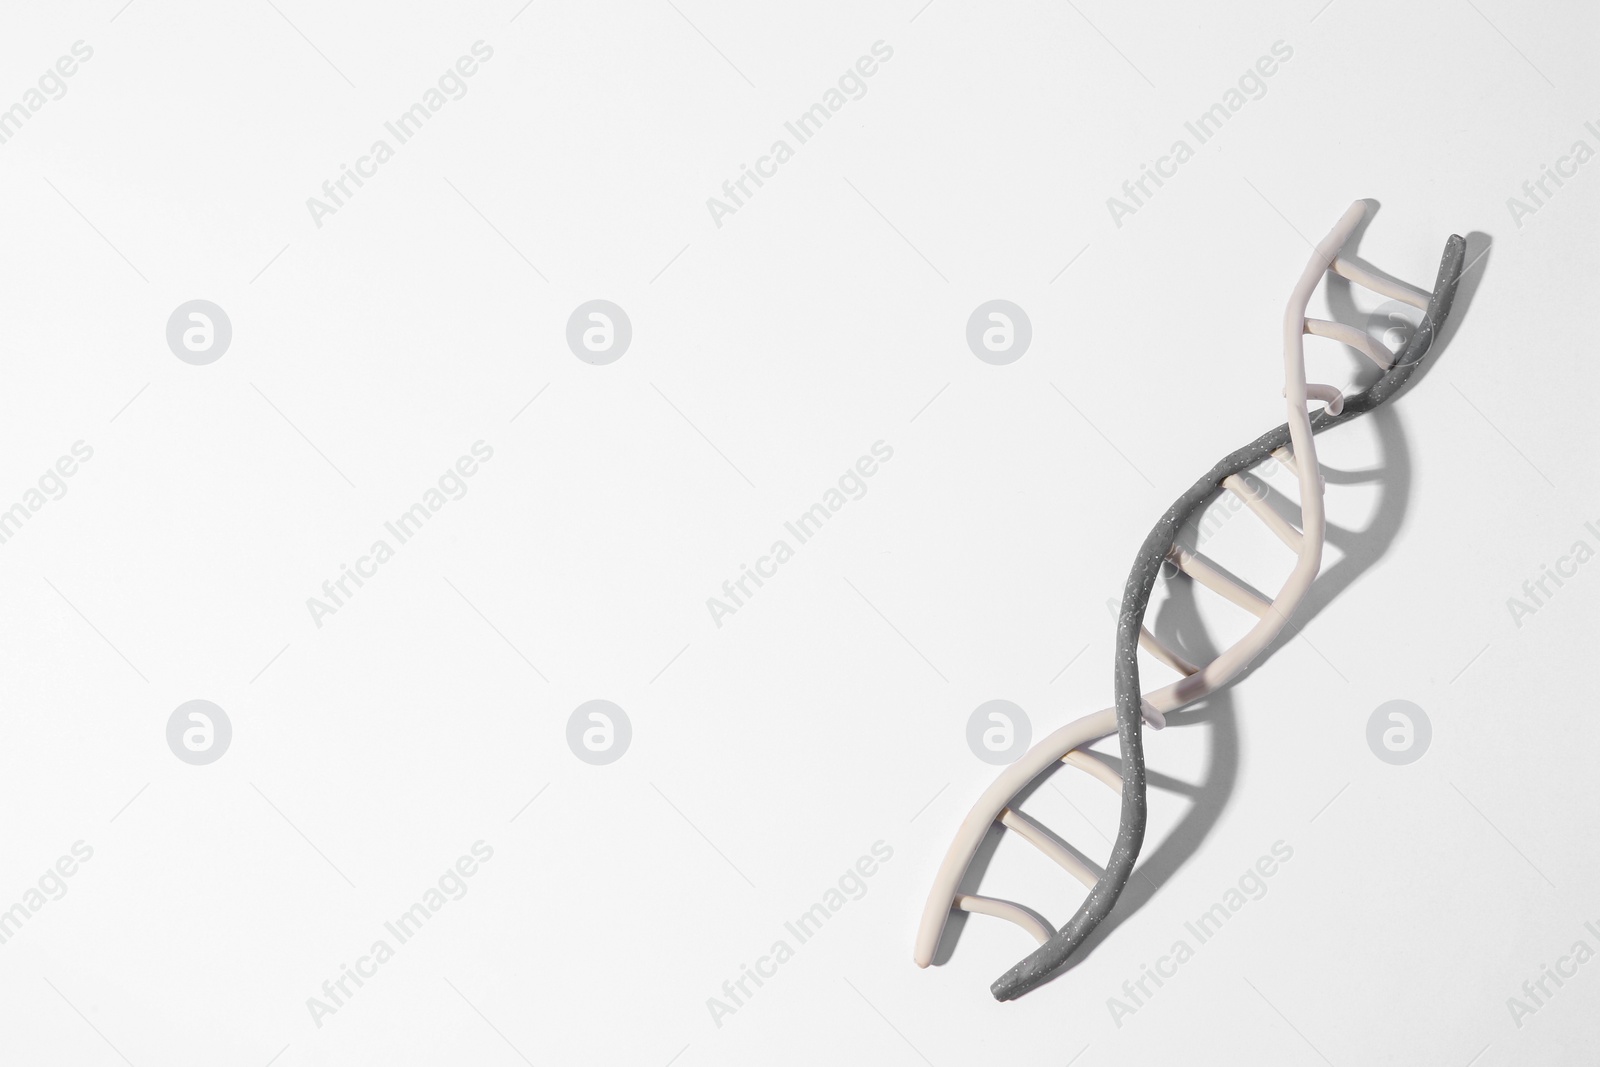 Photo of DNA molecule model made of colorful plasticine on white background, top view. Space for text